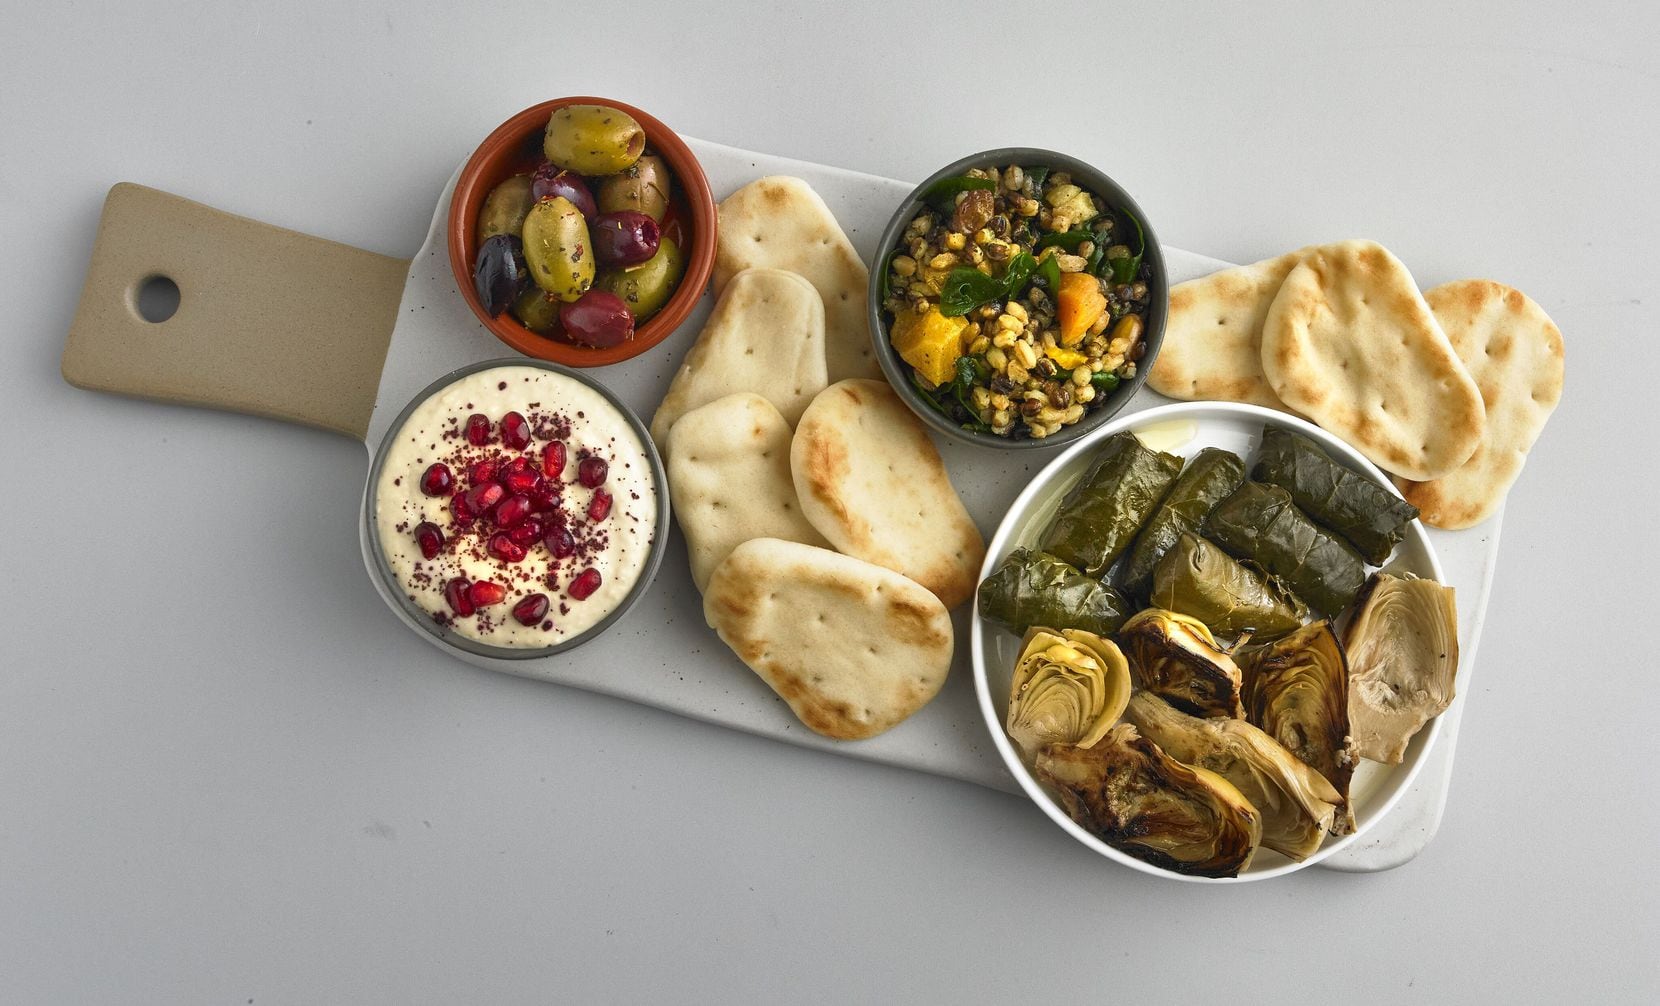 One of Central Market's Valentine's dinners for two includes a Mediterranean mezze platter.